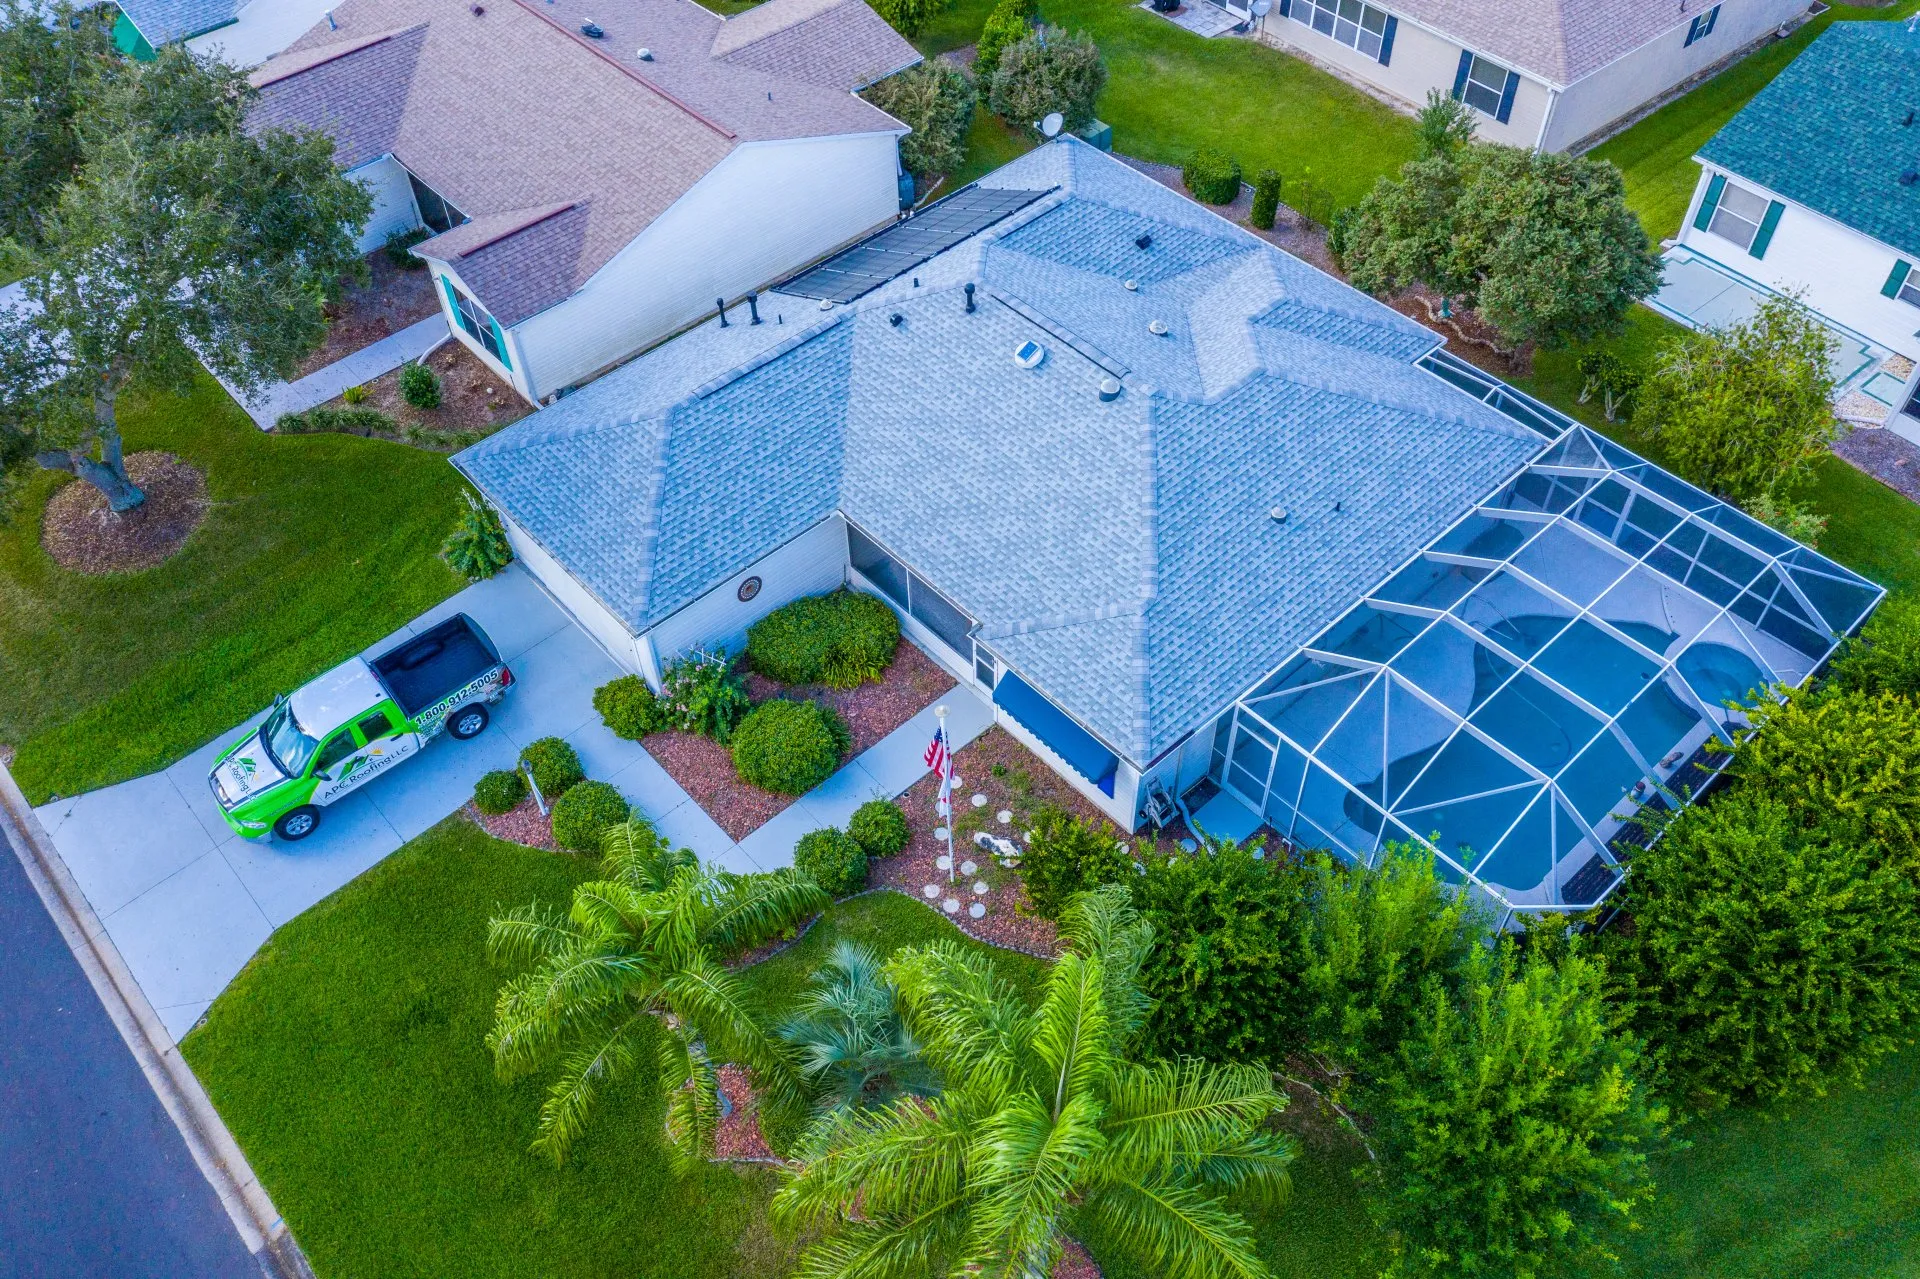 APC Roofing in Clermont, FL - New Shingle Roof